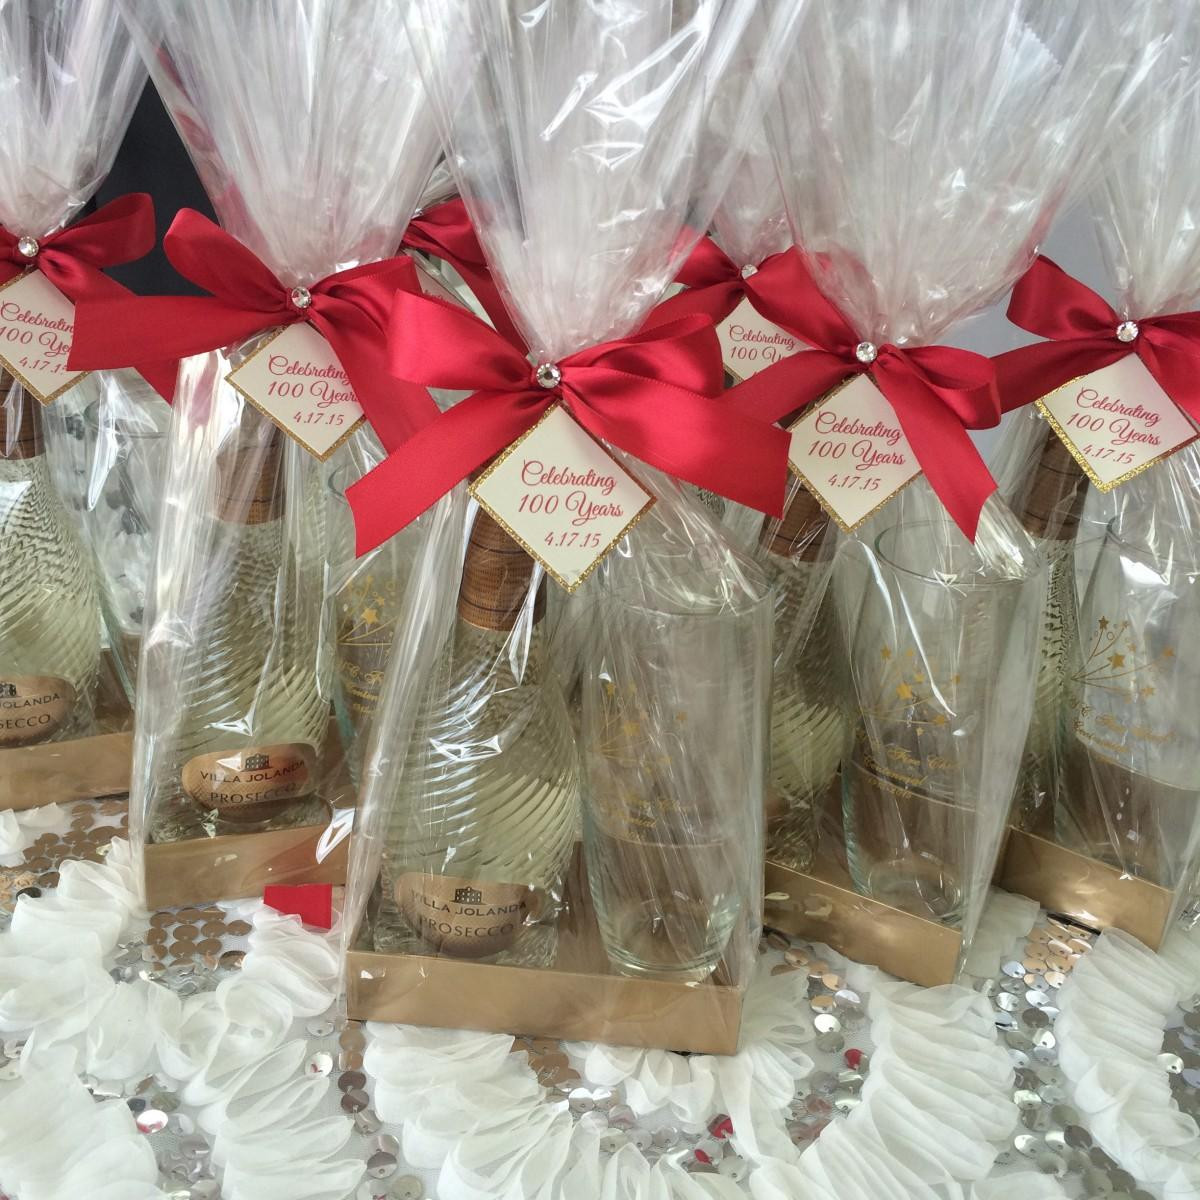 Fairytale Wedding Favors
 Fairy Tale Affairs Personalized Event and Wedding Favors